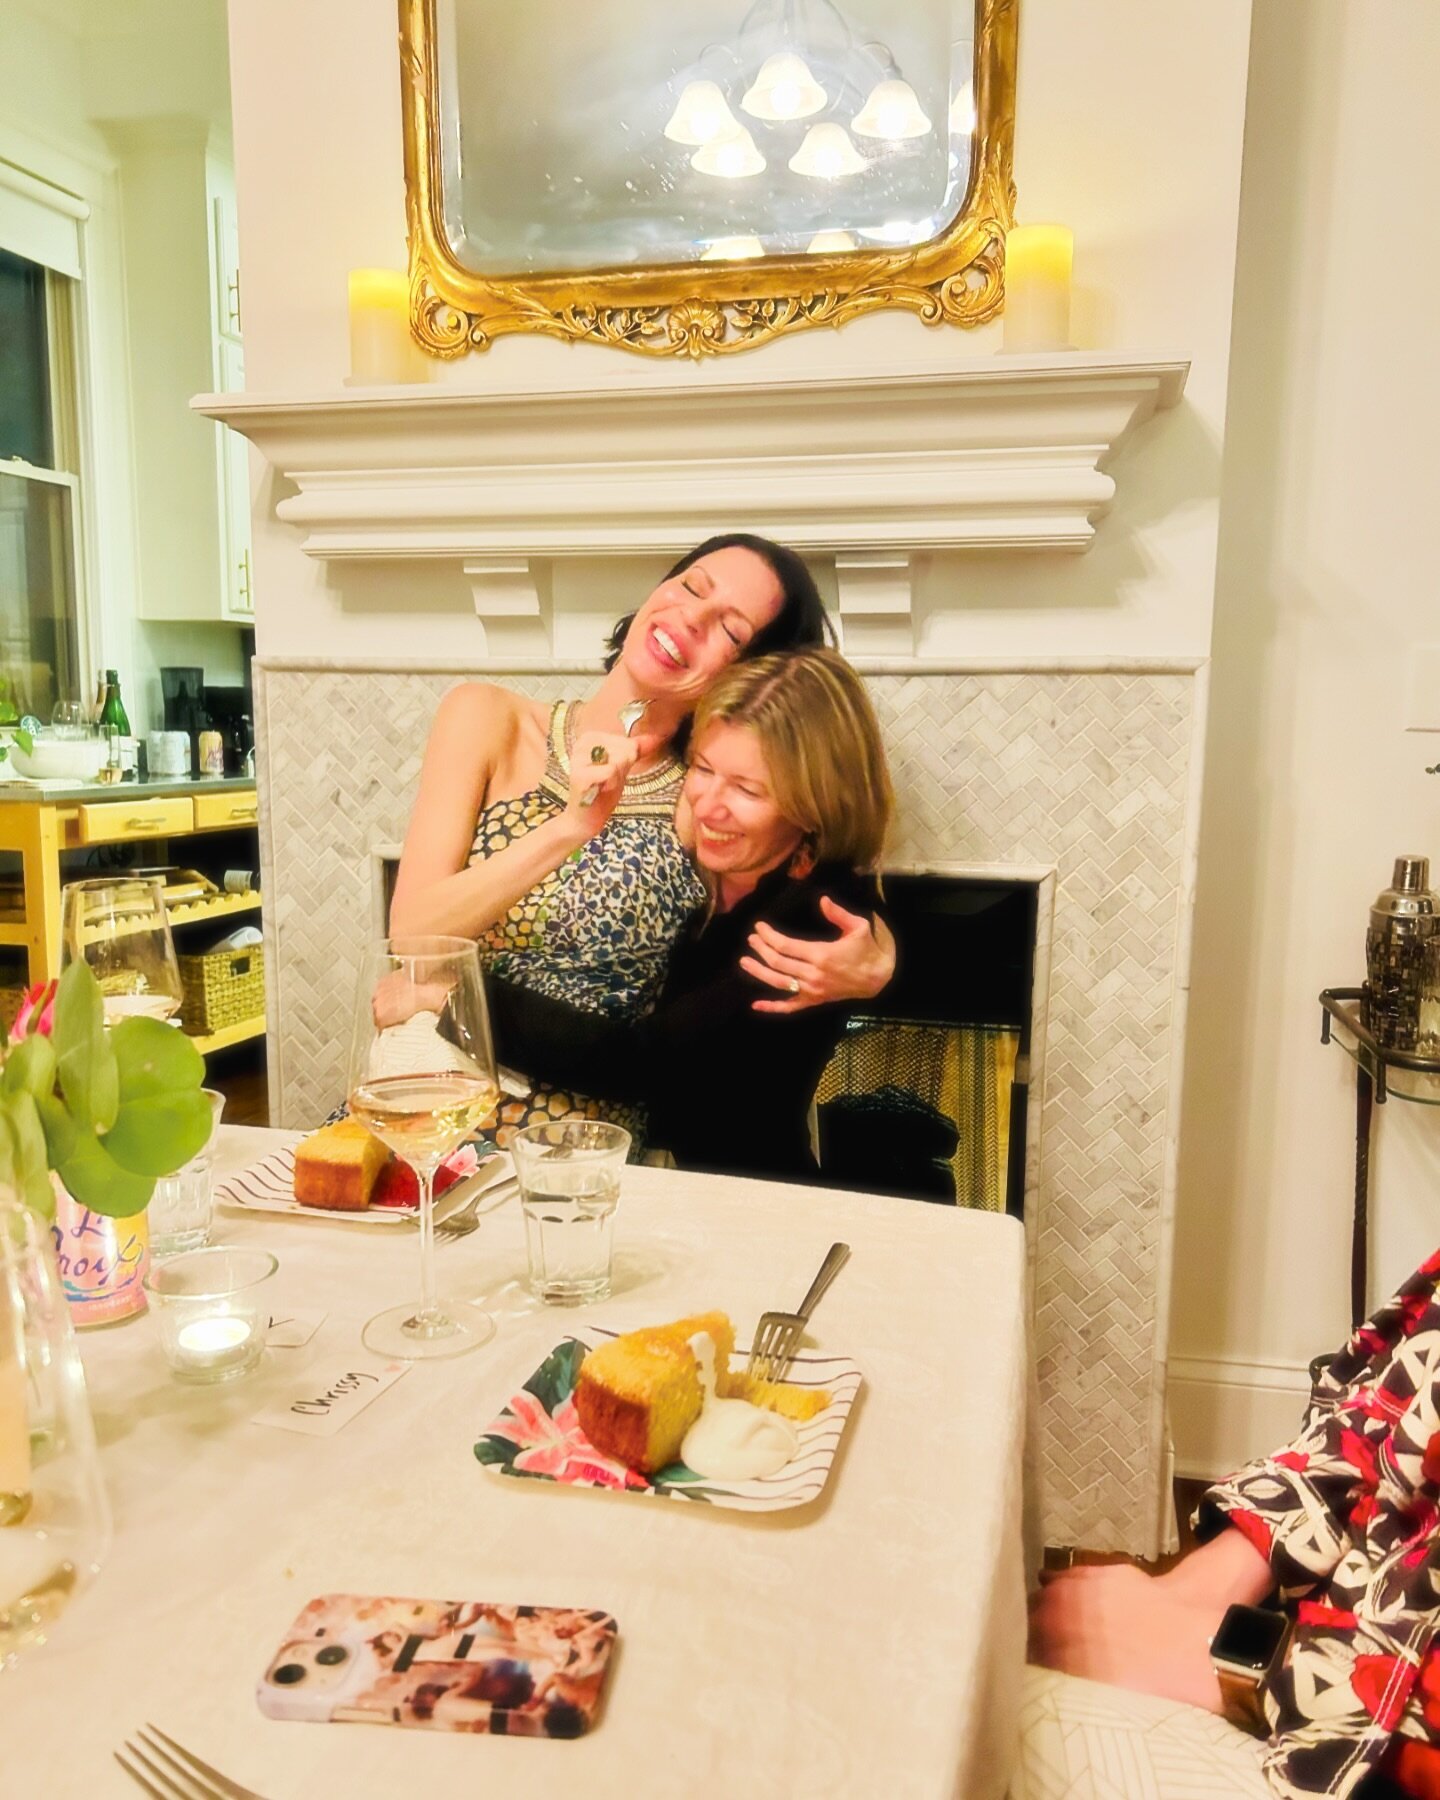 Happy birthday to my dearest friend and dinner party partner in crime since high school @annawatsoncarl (1 day late!)

You are truly the most committed and caring friend-a constant encouragement- and humble super star ⭐️ I can&rsquo;t wait to see you